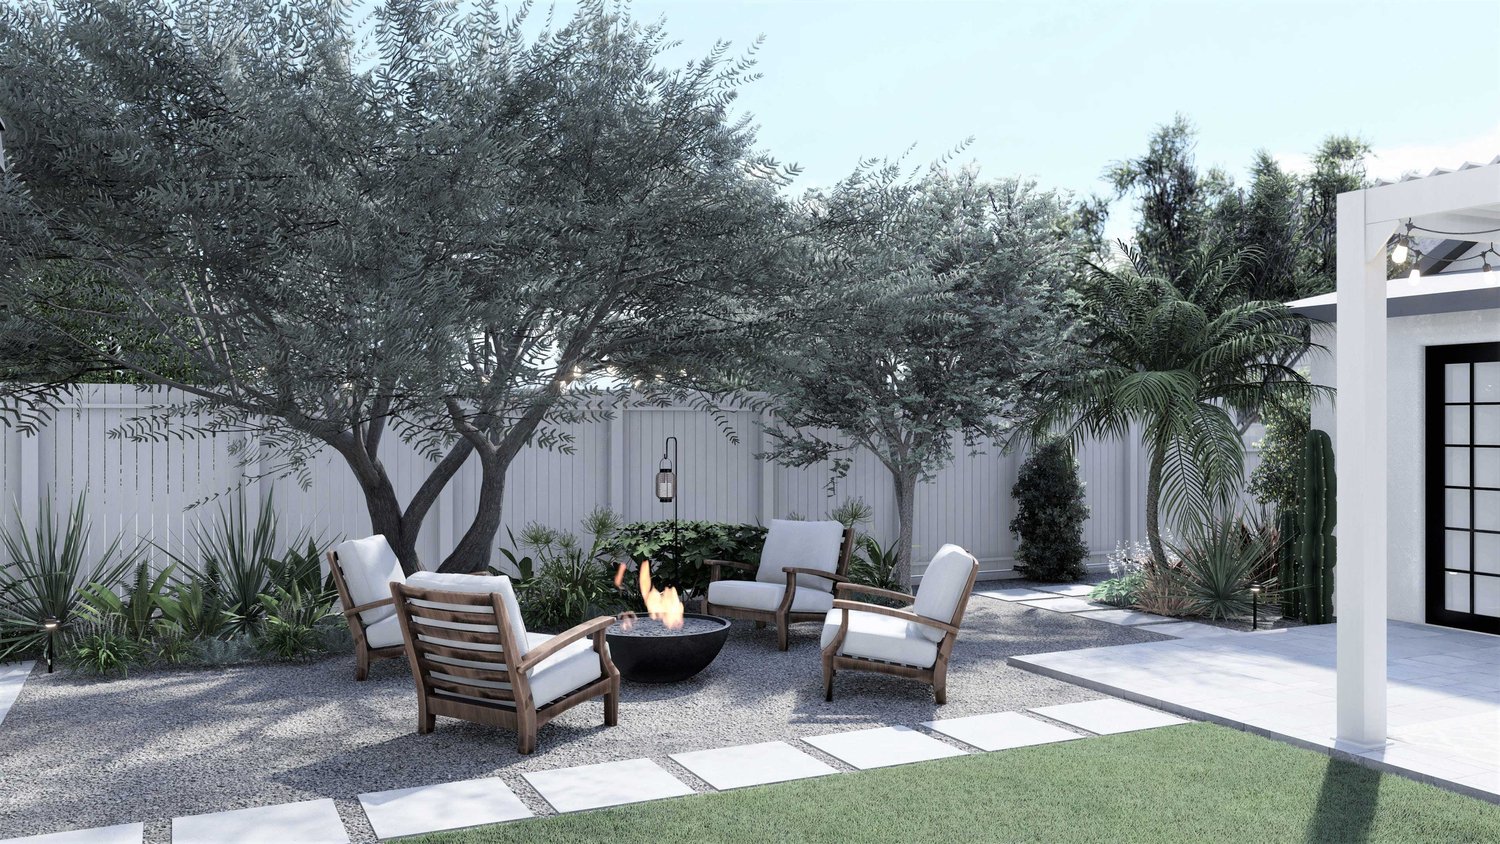 Los Angeles fenced backyard with gravel fire pit seating area with lounge chairs, trees, plants, lawn and paver walkway